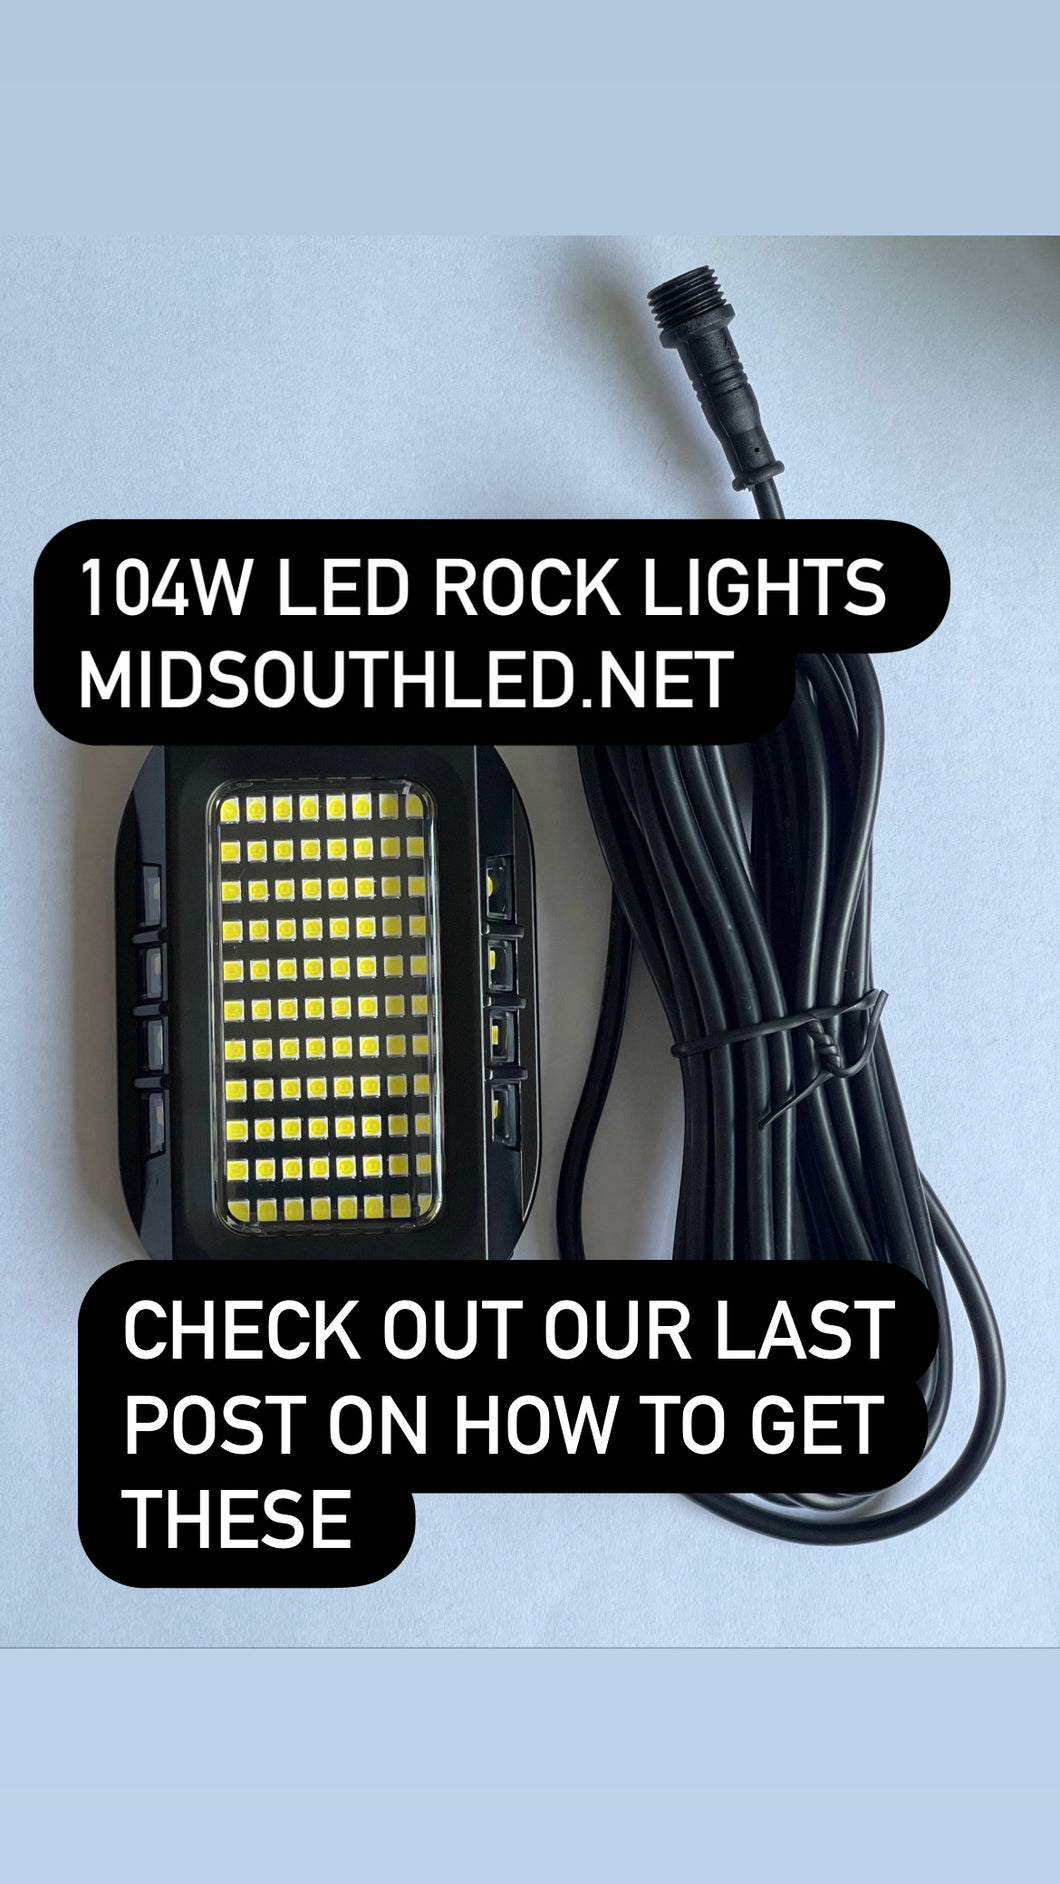 104 Led Pure White Rock Lights (The brightest on the market) – MidsouthLED